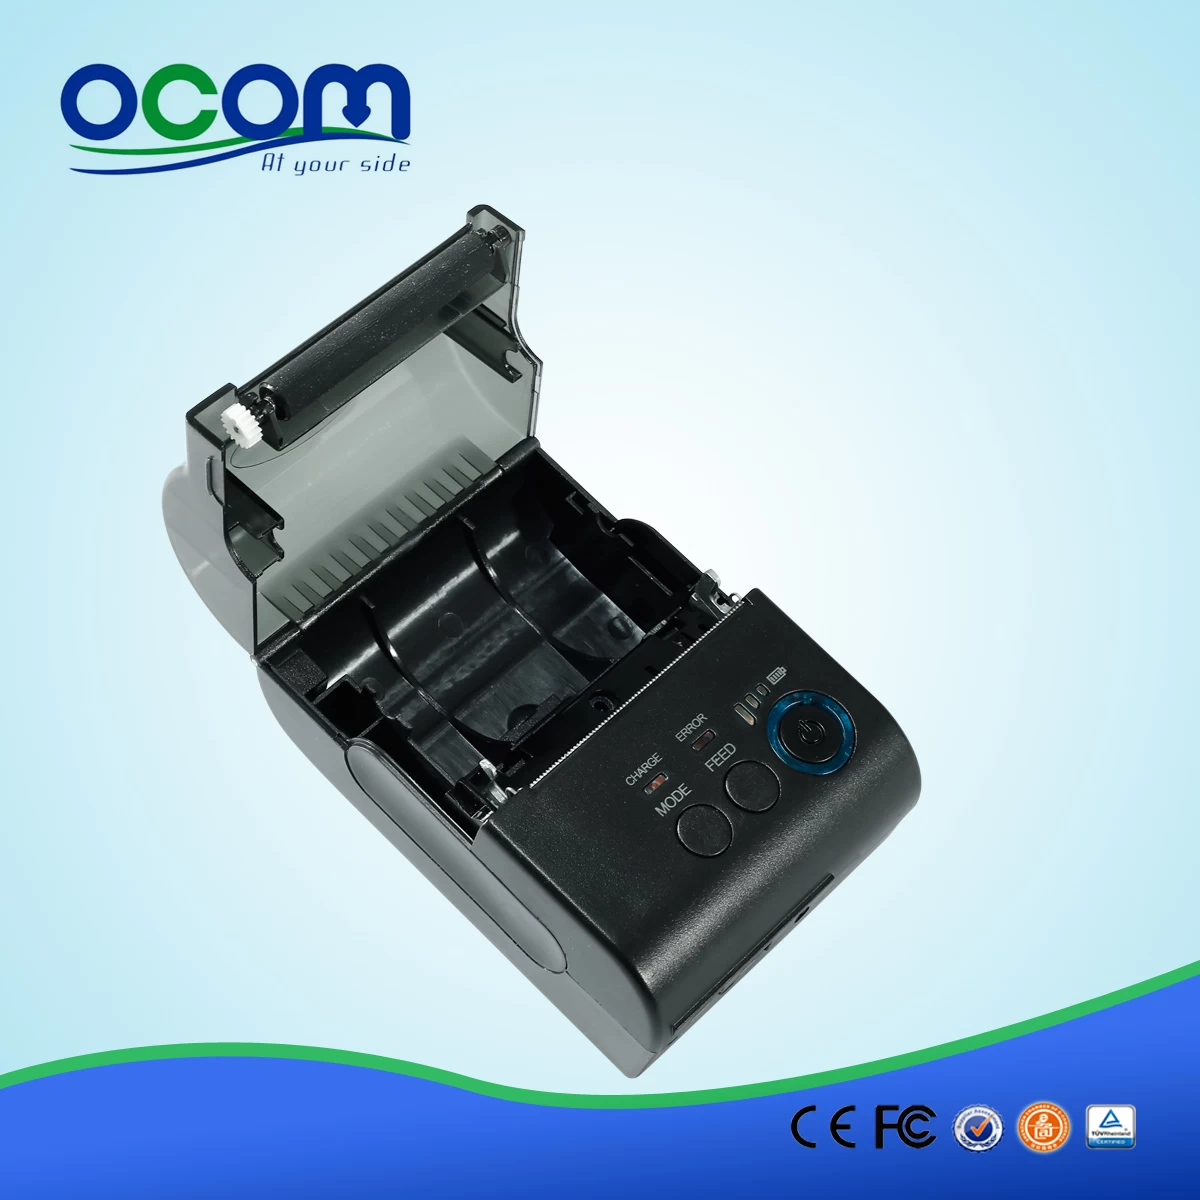 Bluetooth POS Printer Android Support Thermal Printer WinCE Support Printer (OCPP-M03-BB)